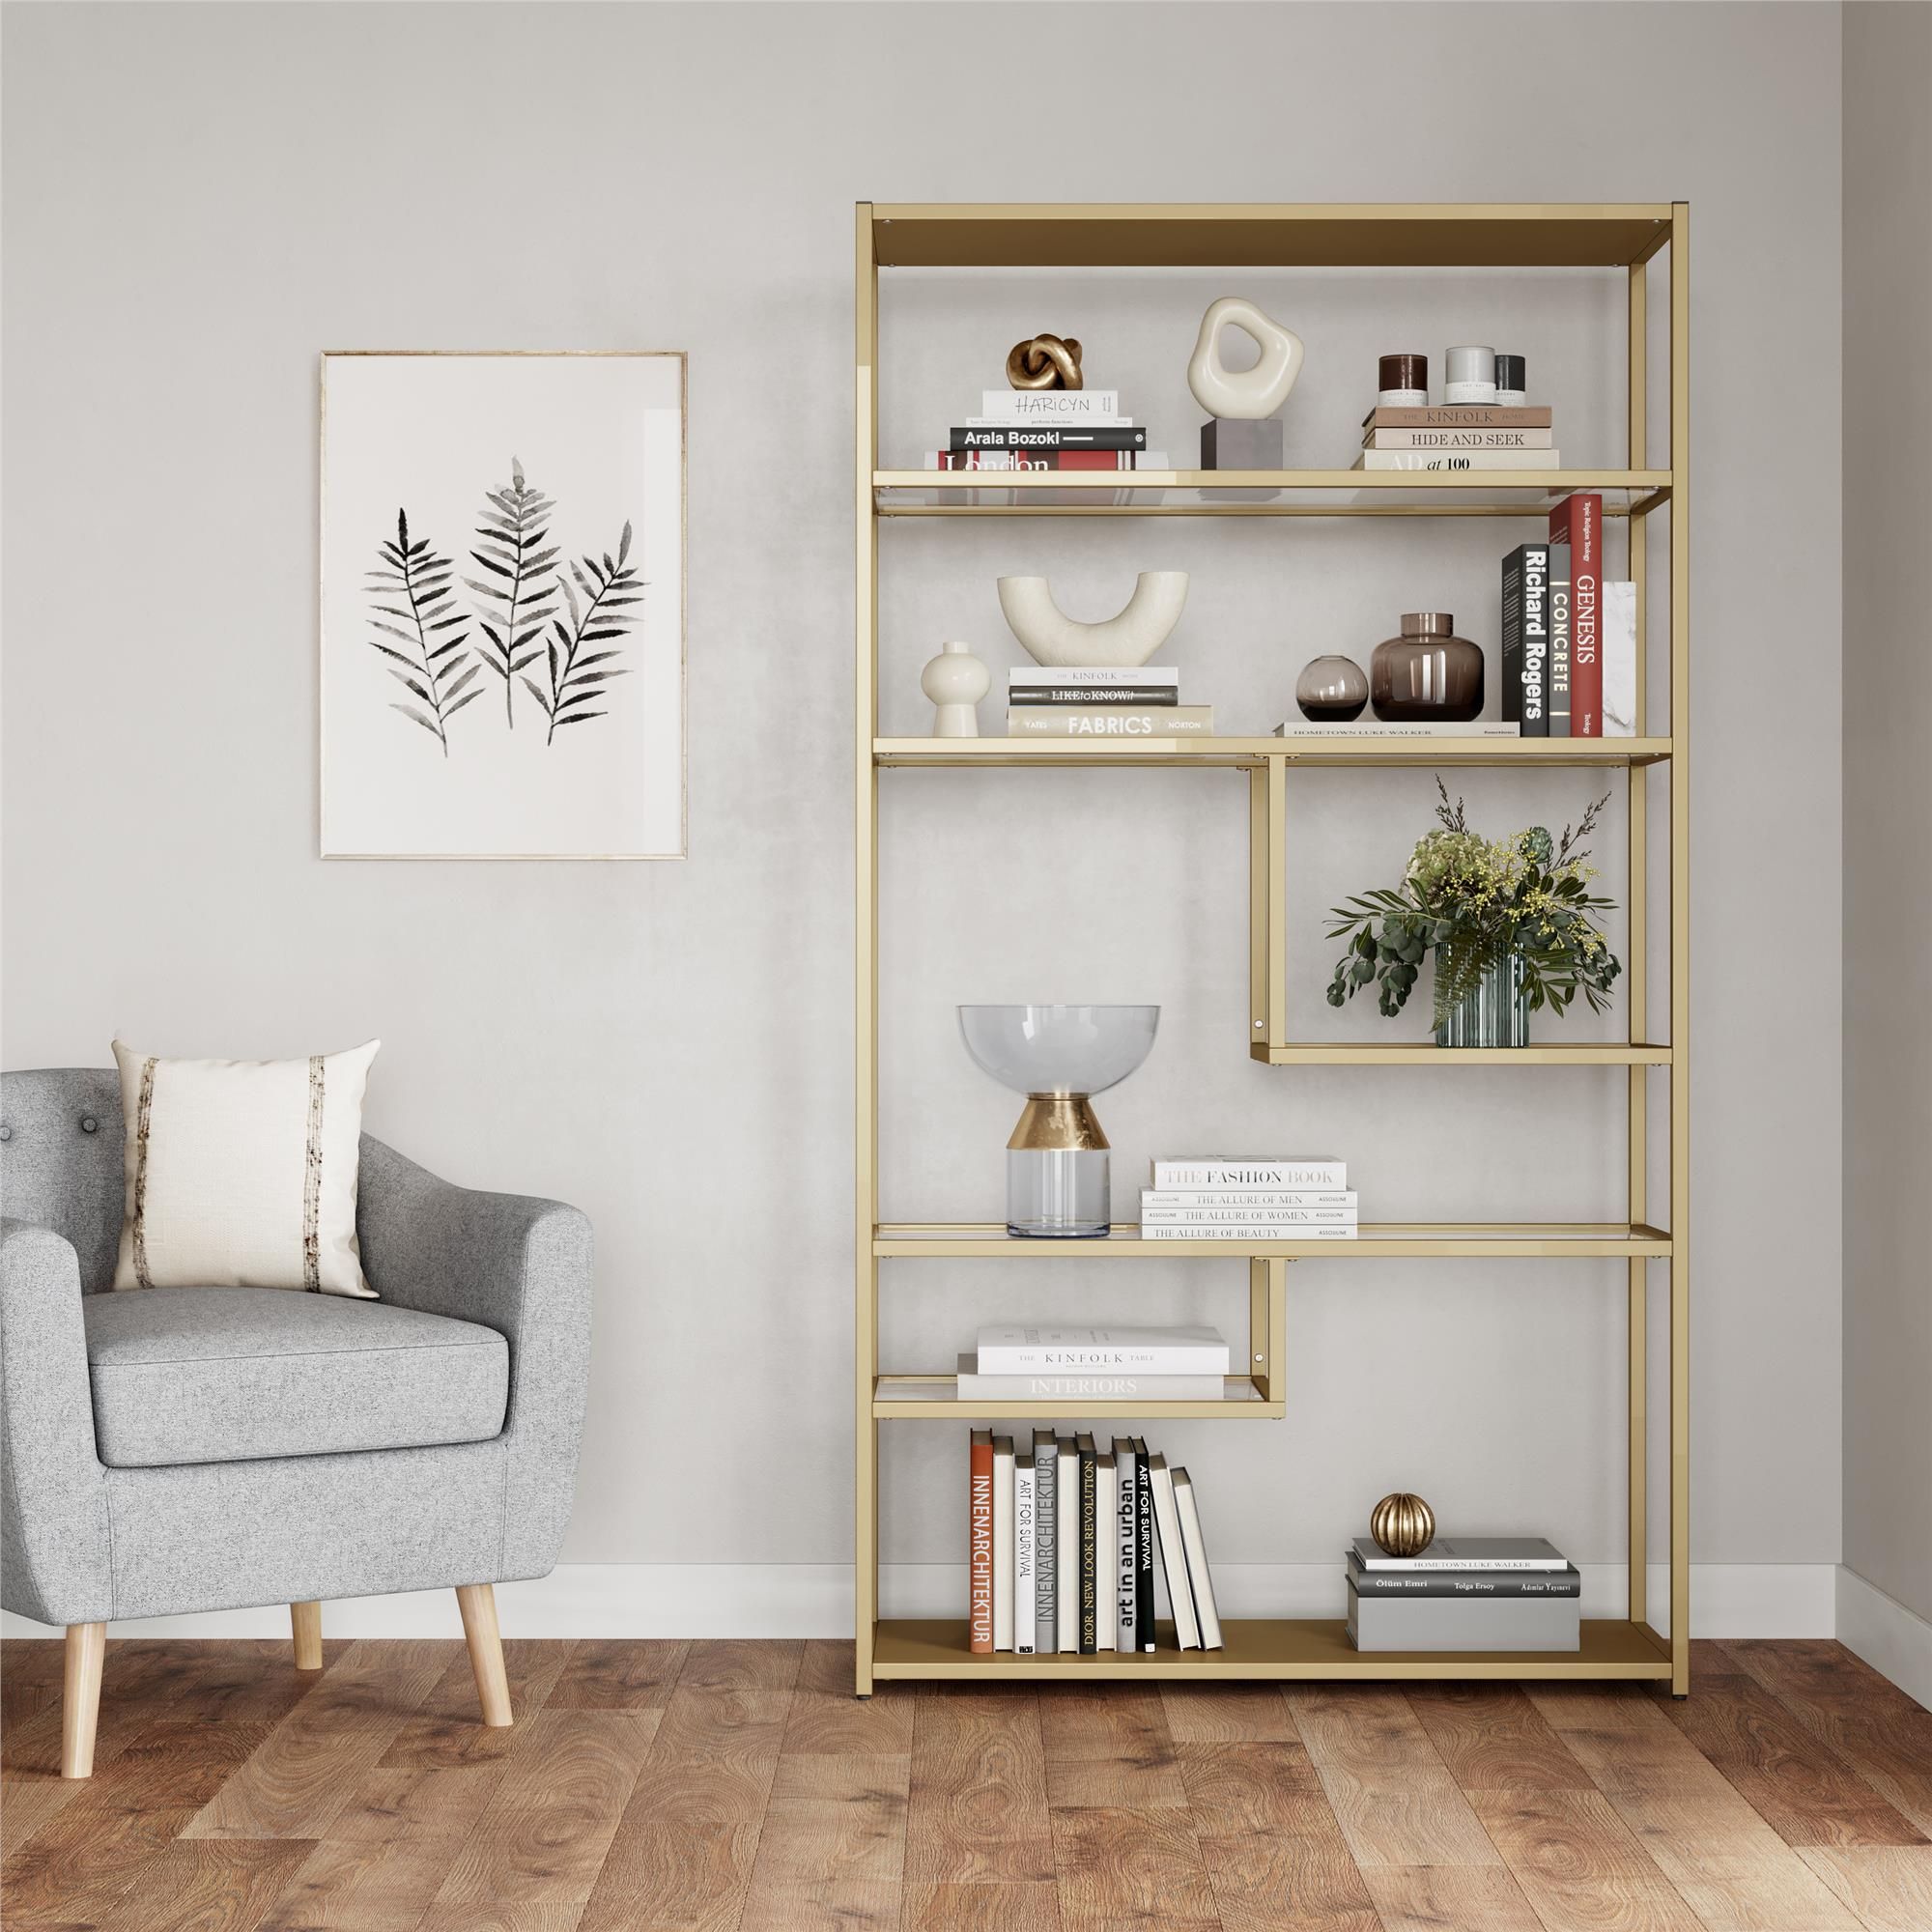 Woven Paths Bookcase, Living Room & Home Office, Brass – Walmart Intended For Brass Bookcases (View 8 of 15)